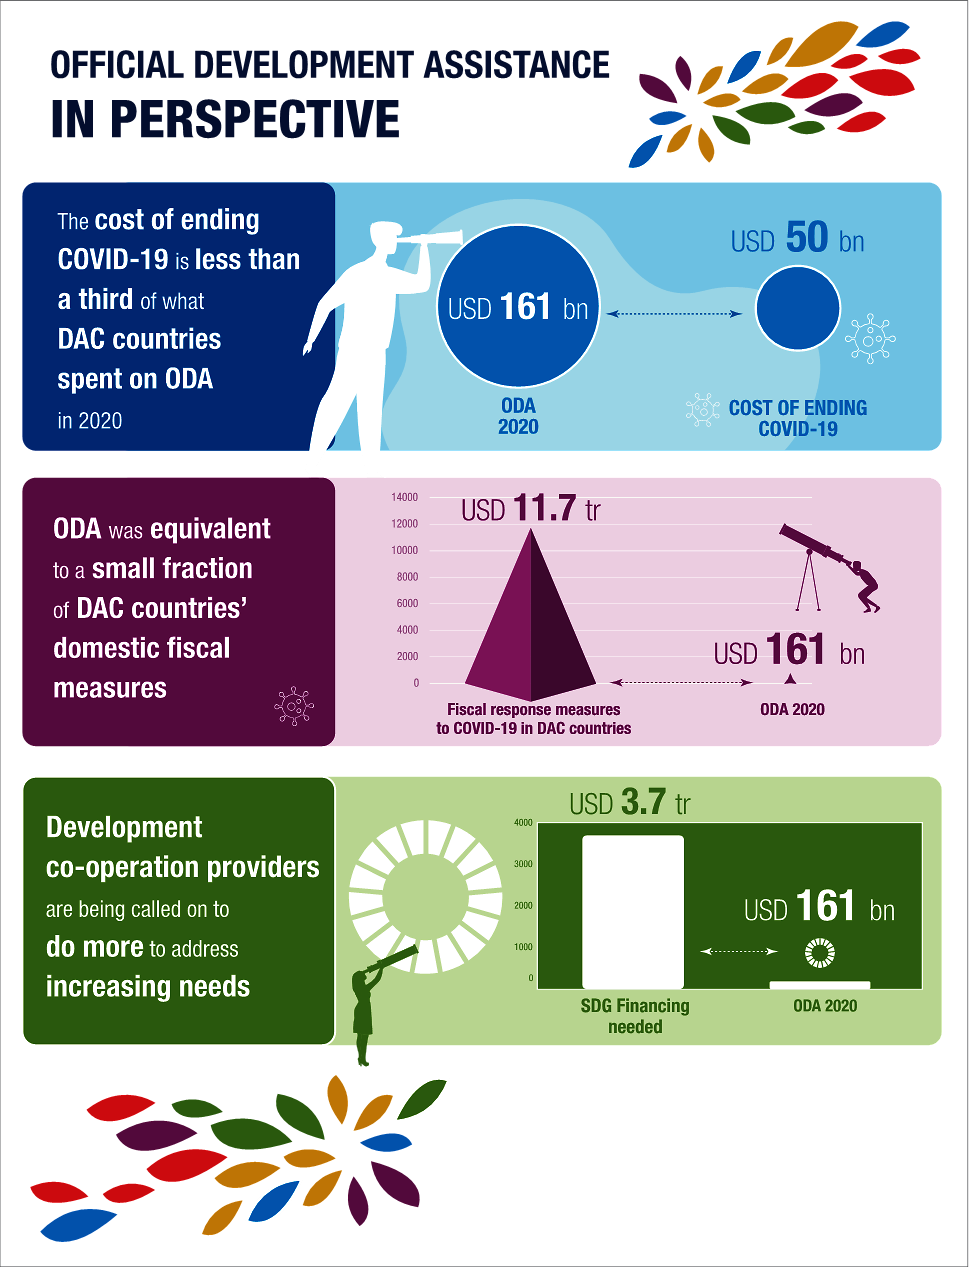 Infographic 1. Official development assistance during the COVID-19 pandemic